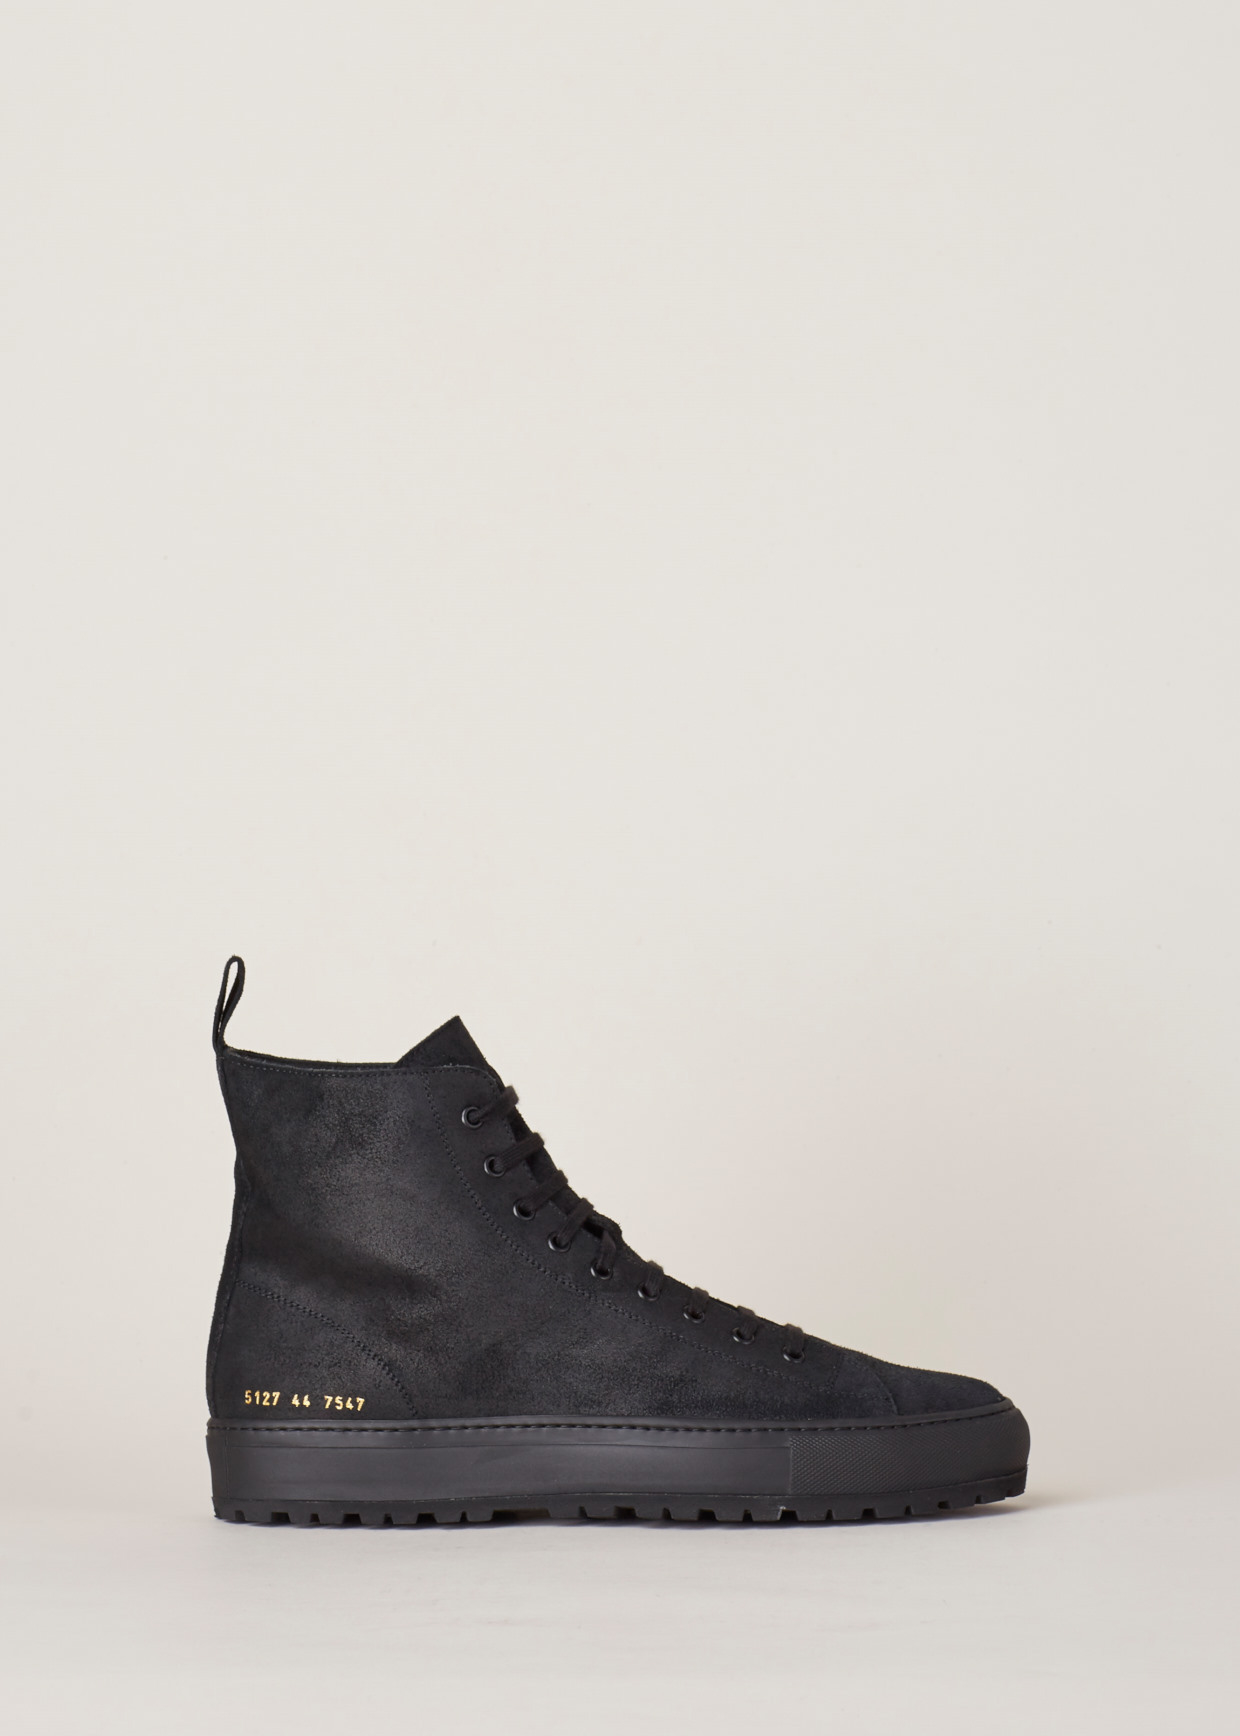 common-projects-black-black-waxed-suede-tournament-high-lug-sneaker-product-3-144119918-normal.jpeg